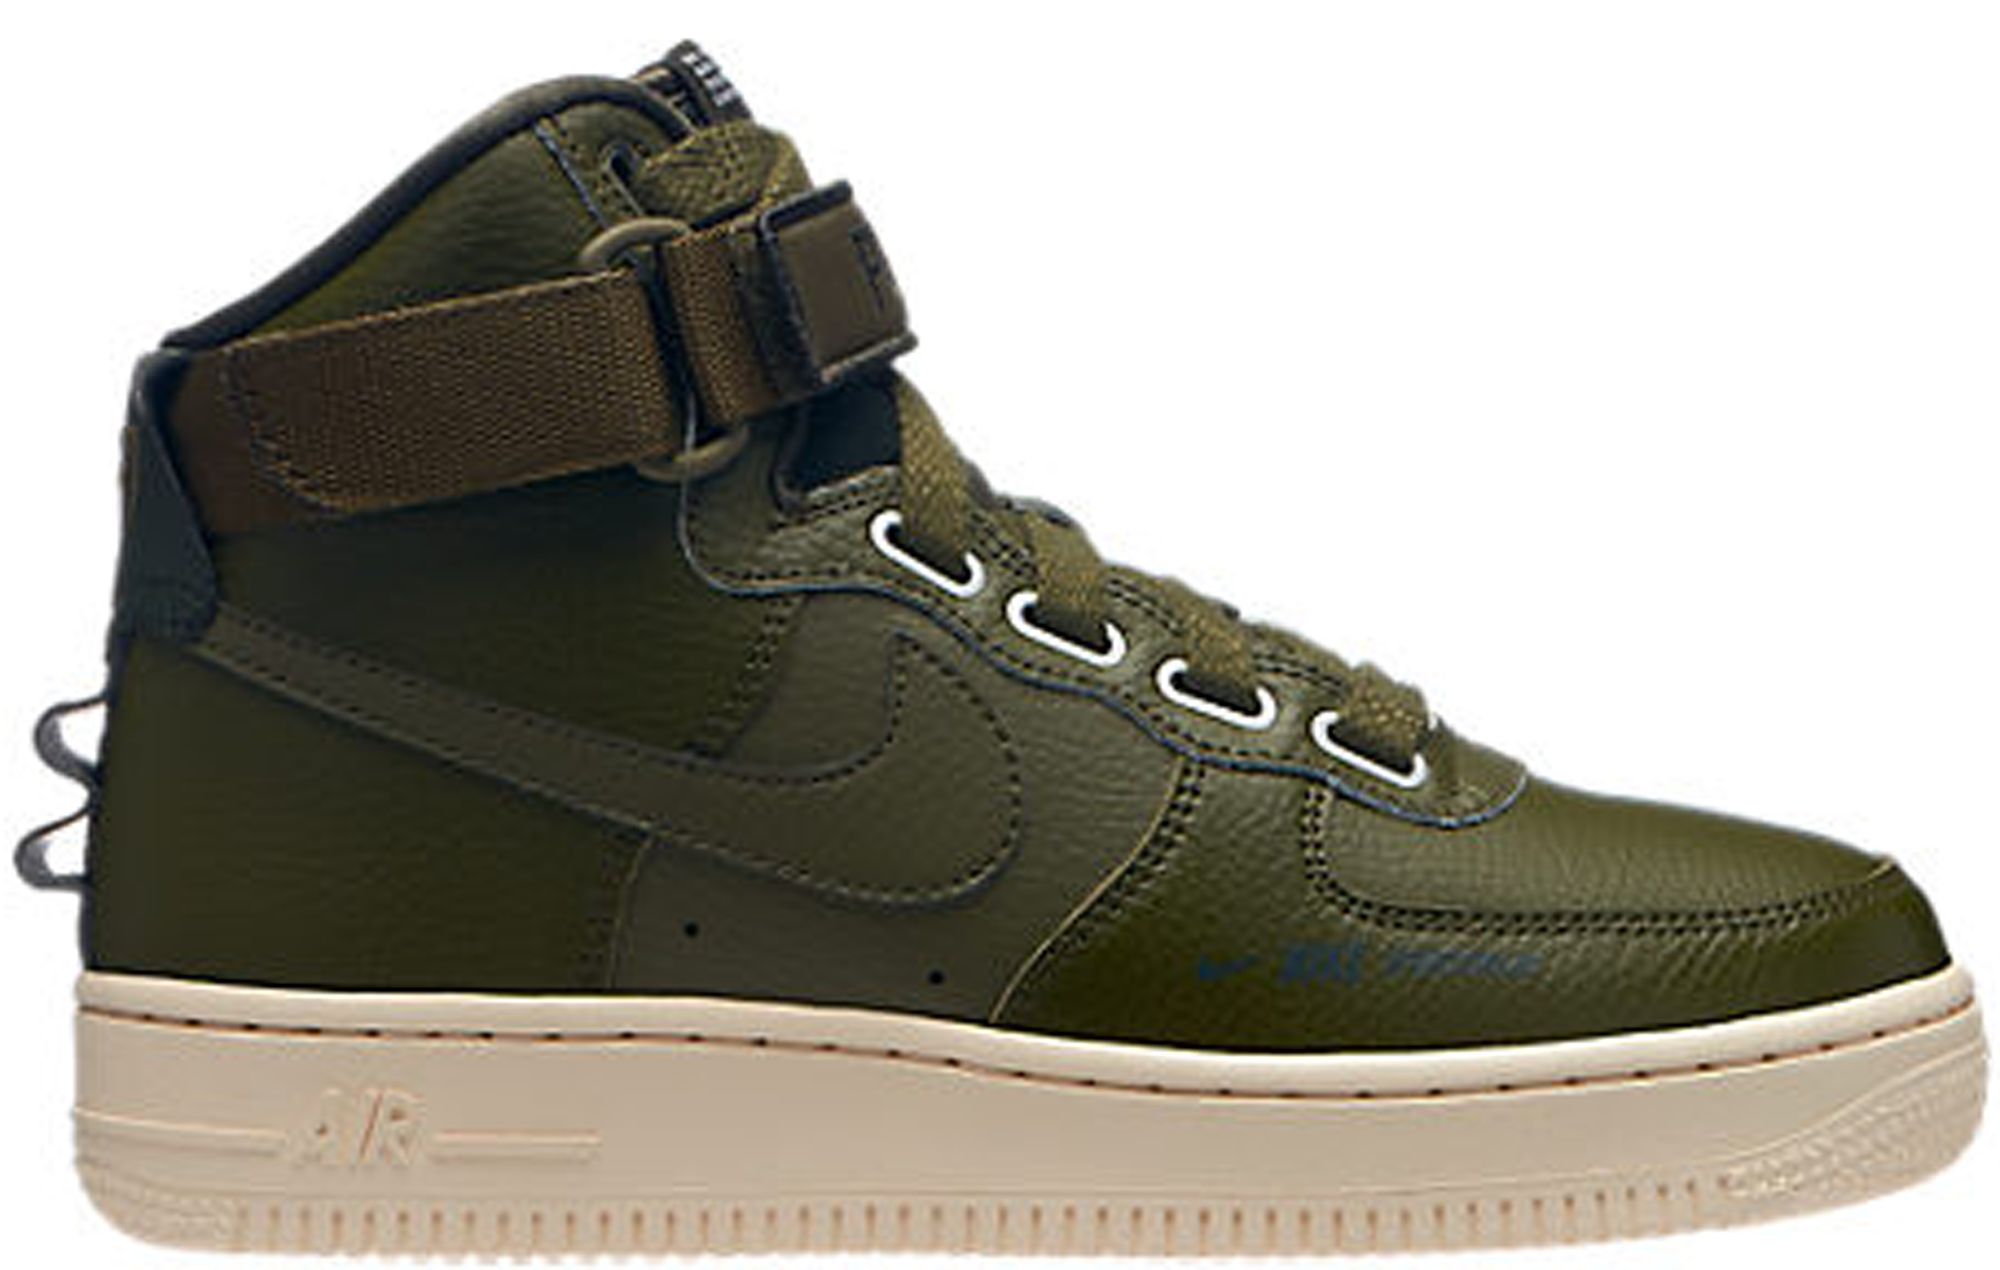 air force 1 utility olive